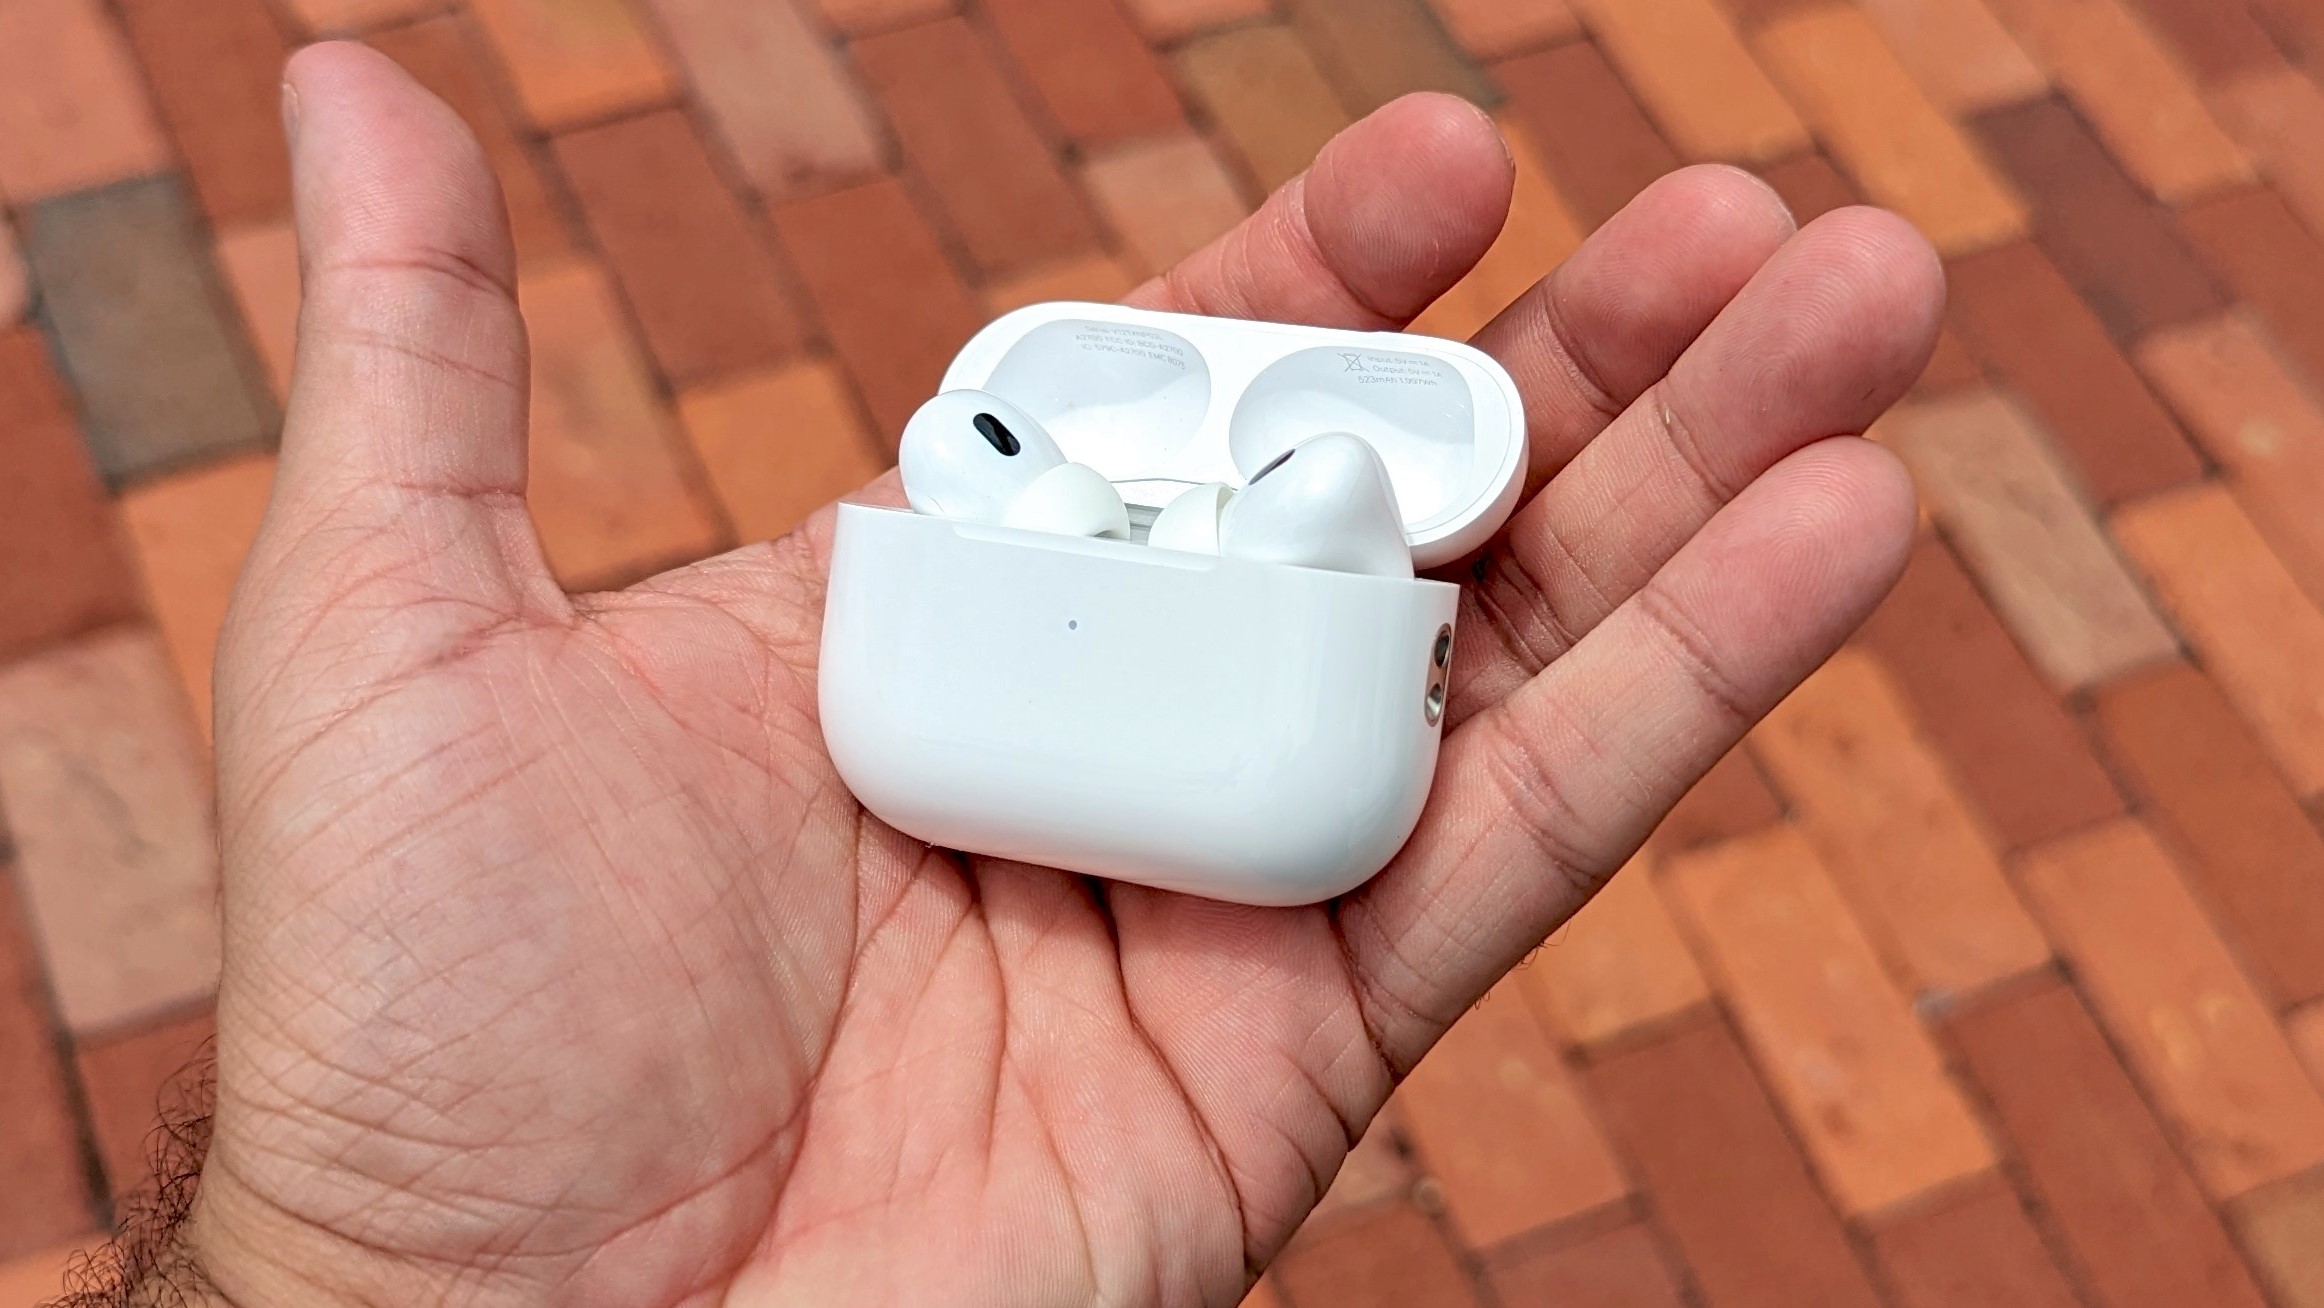 The Apple AirPods Max's Achilles heel